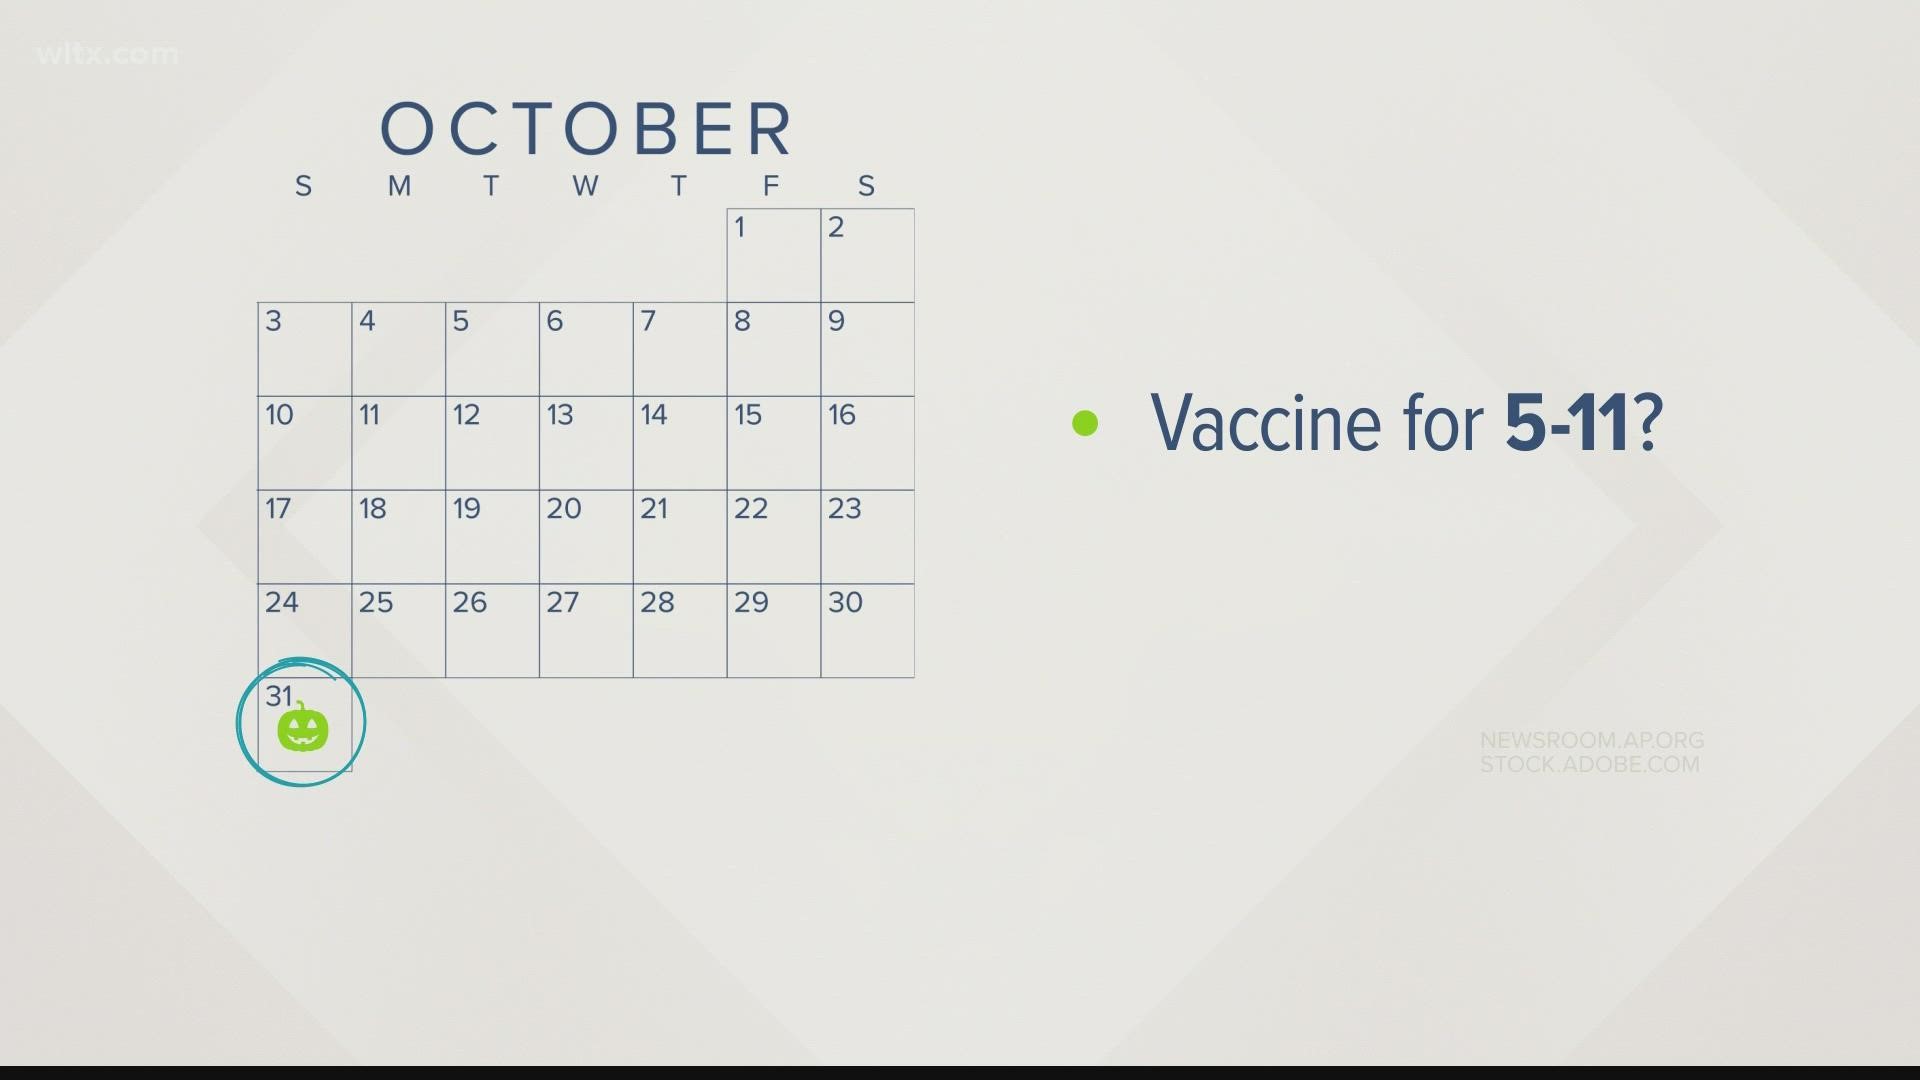 The U.S. could authorize Pfizer's COVID-19 vaccine for children ages 5-11 years old by the end of October.